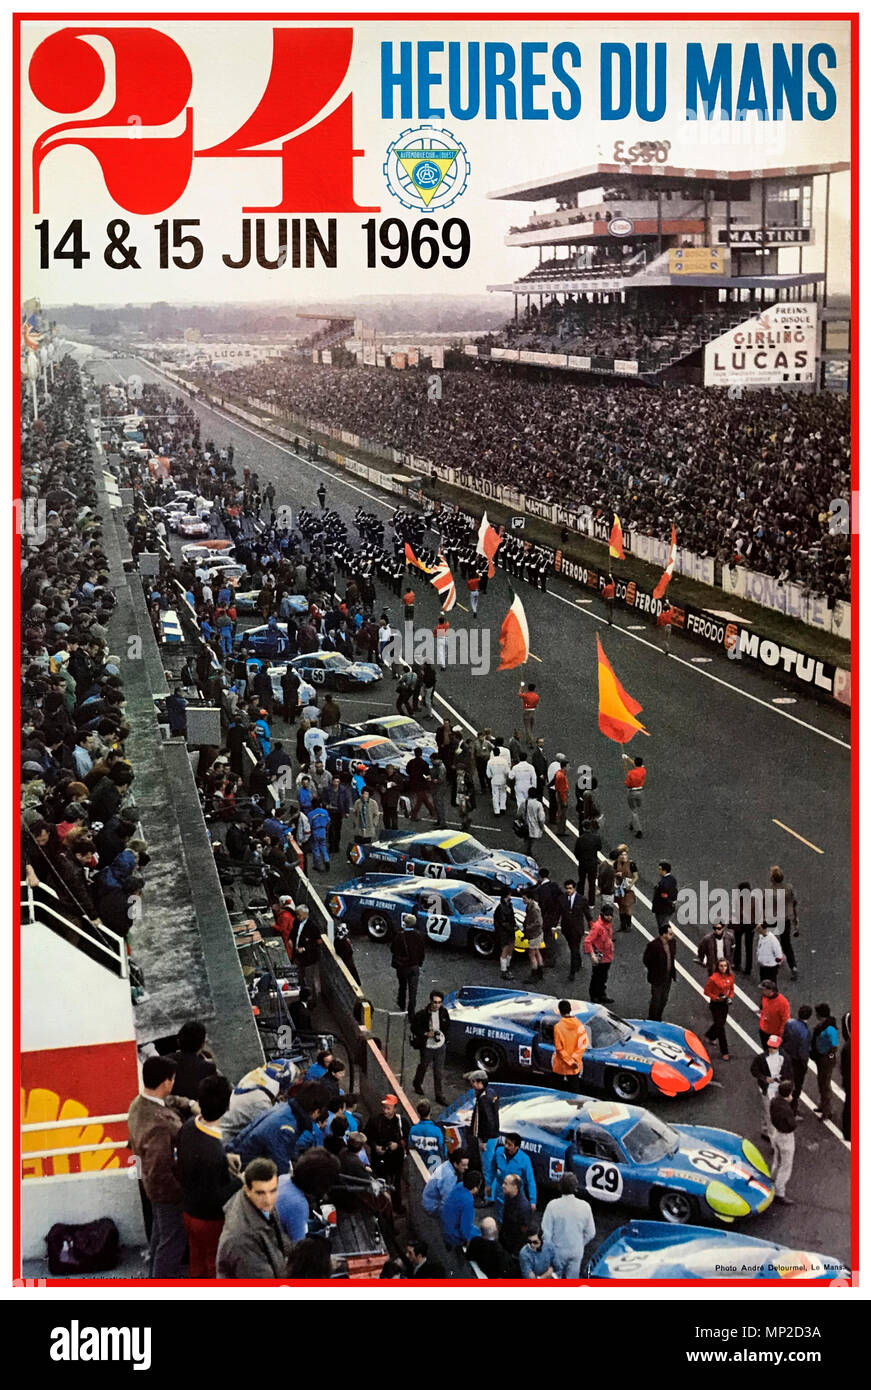 Le Mans 1969 Programme Cover featuring the traditional pit start racing start 14-15th June 1969 Stock Photo